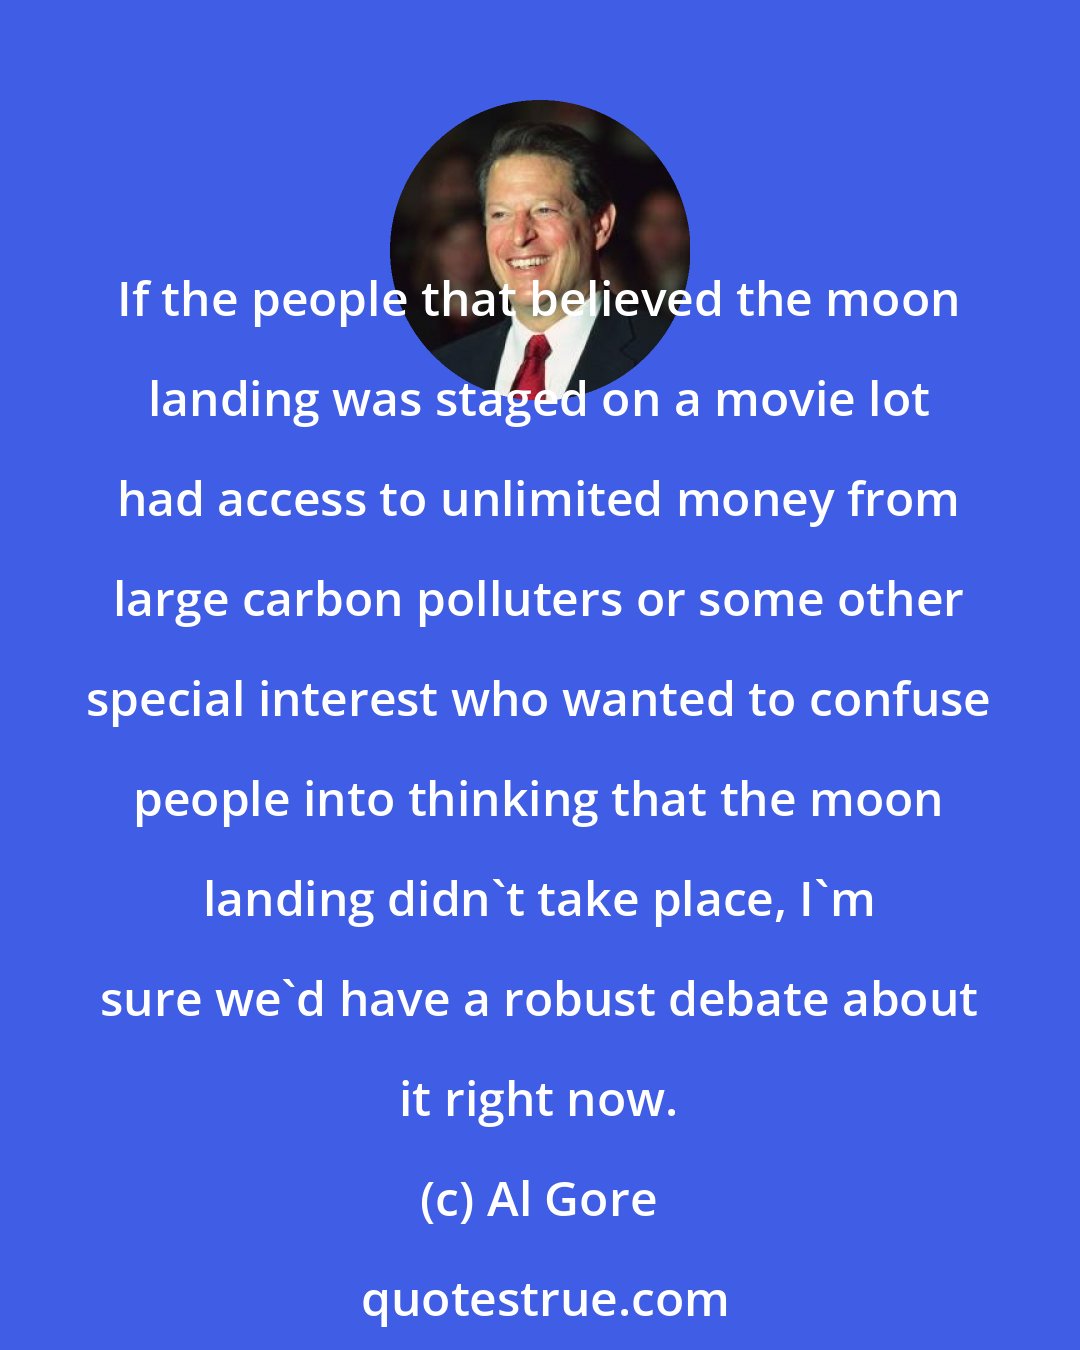 Al Gore: If the people that believed the moon landing was staged on a movie lot had access to unlimited money from large carbon polluters or some other special interest who wanted to confuse people into thinking that the moon landing didn't take place, I'm sure we'd have a robust debate about it right now.